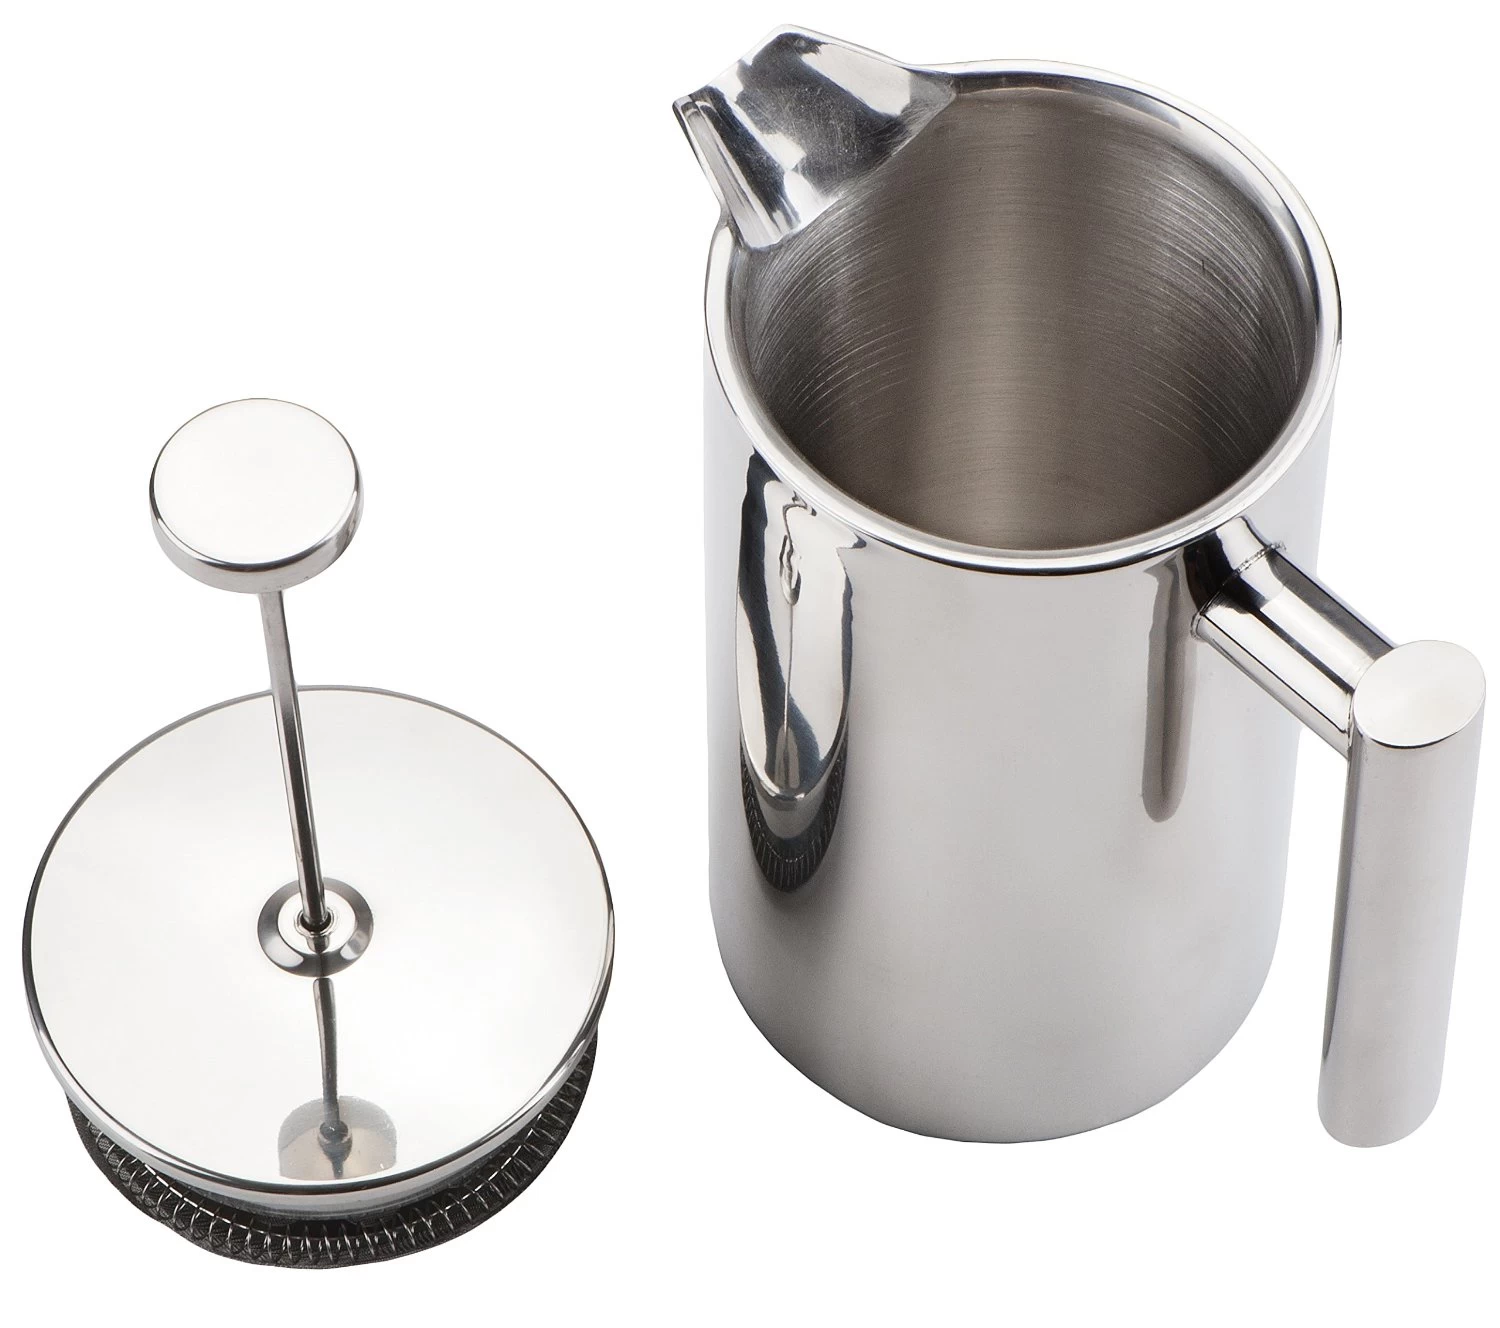 https://cdn.cloudbf.com/thumb/format/mini_xsize/upfile/68/product_o/Stainless-Steel-French-Press-Coffee-Tea-Pot-Double-Walled_2.jpg.webp